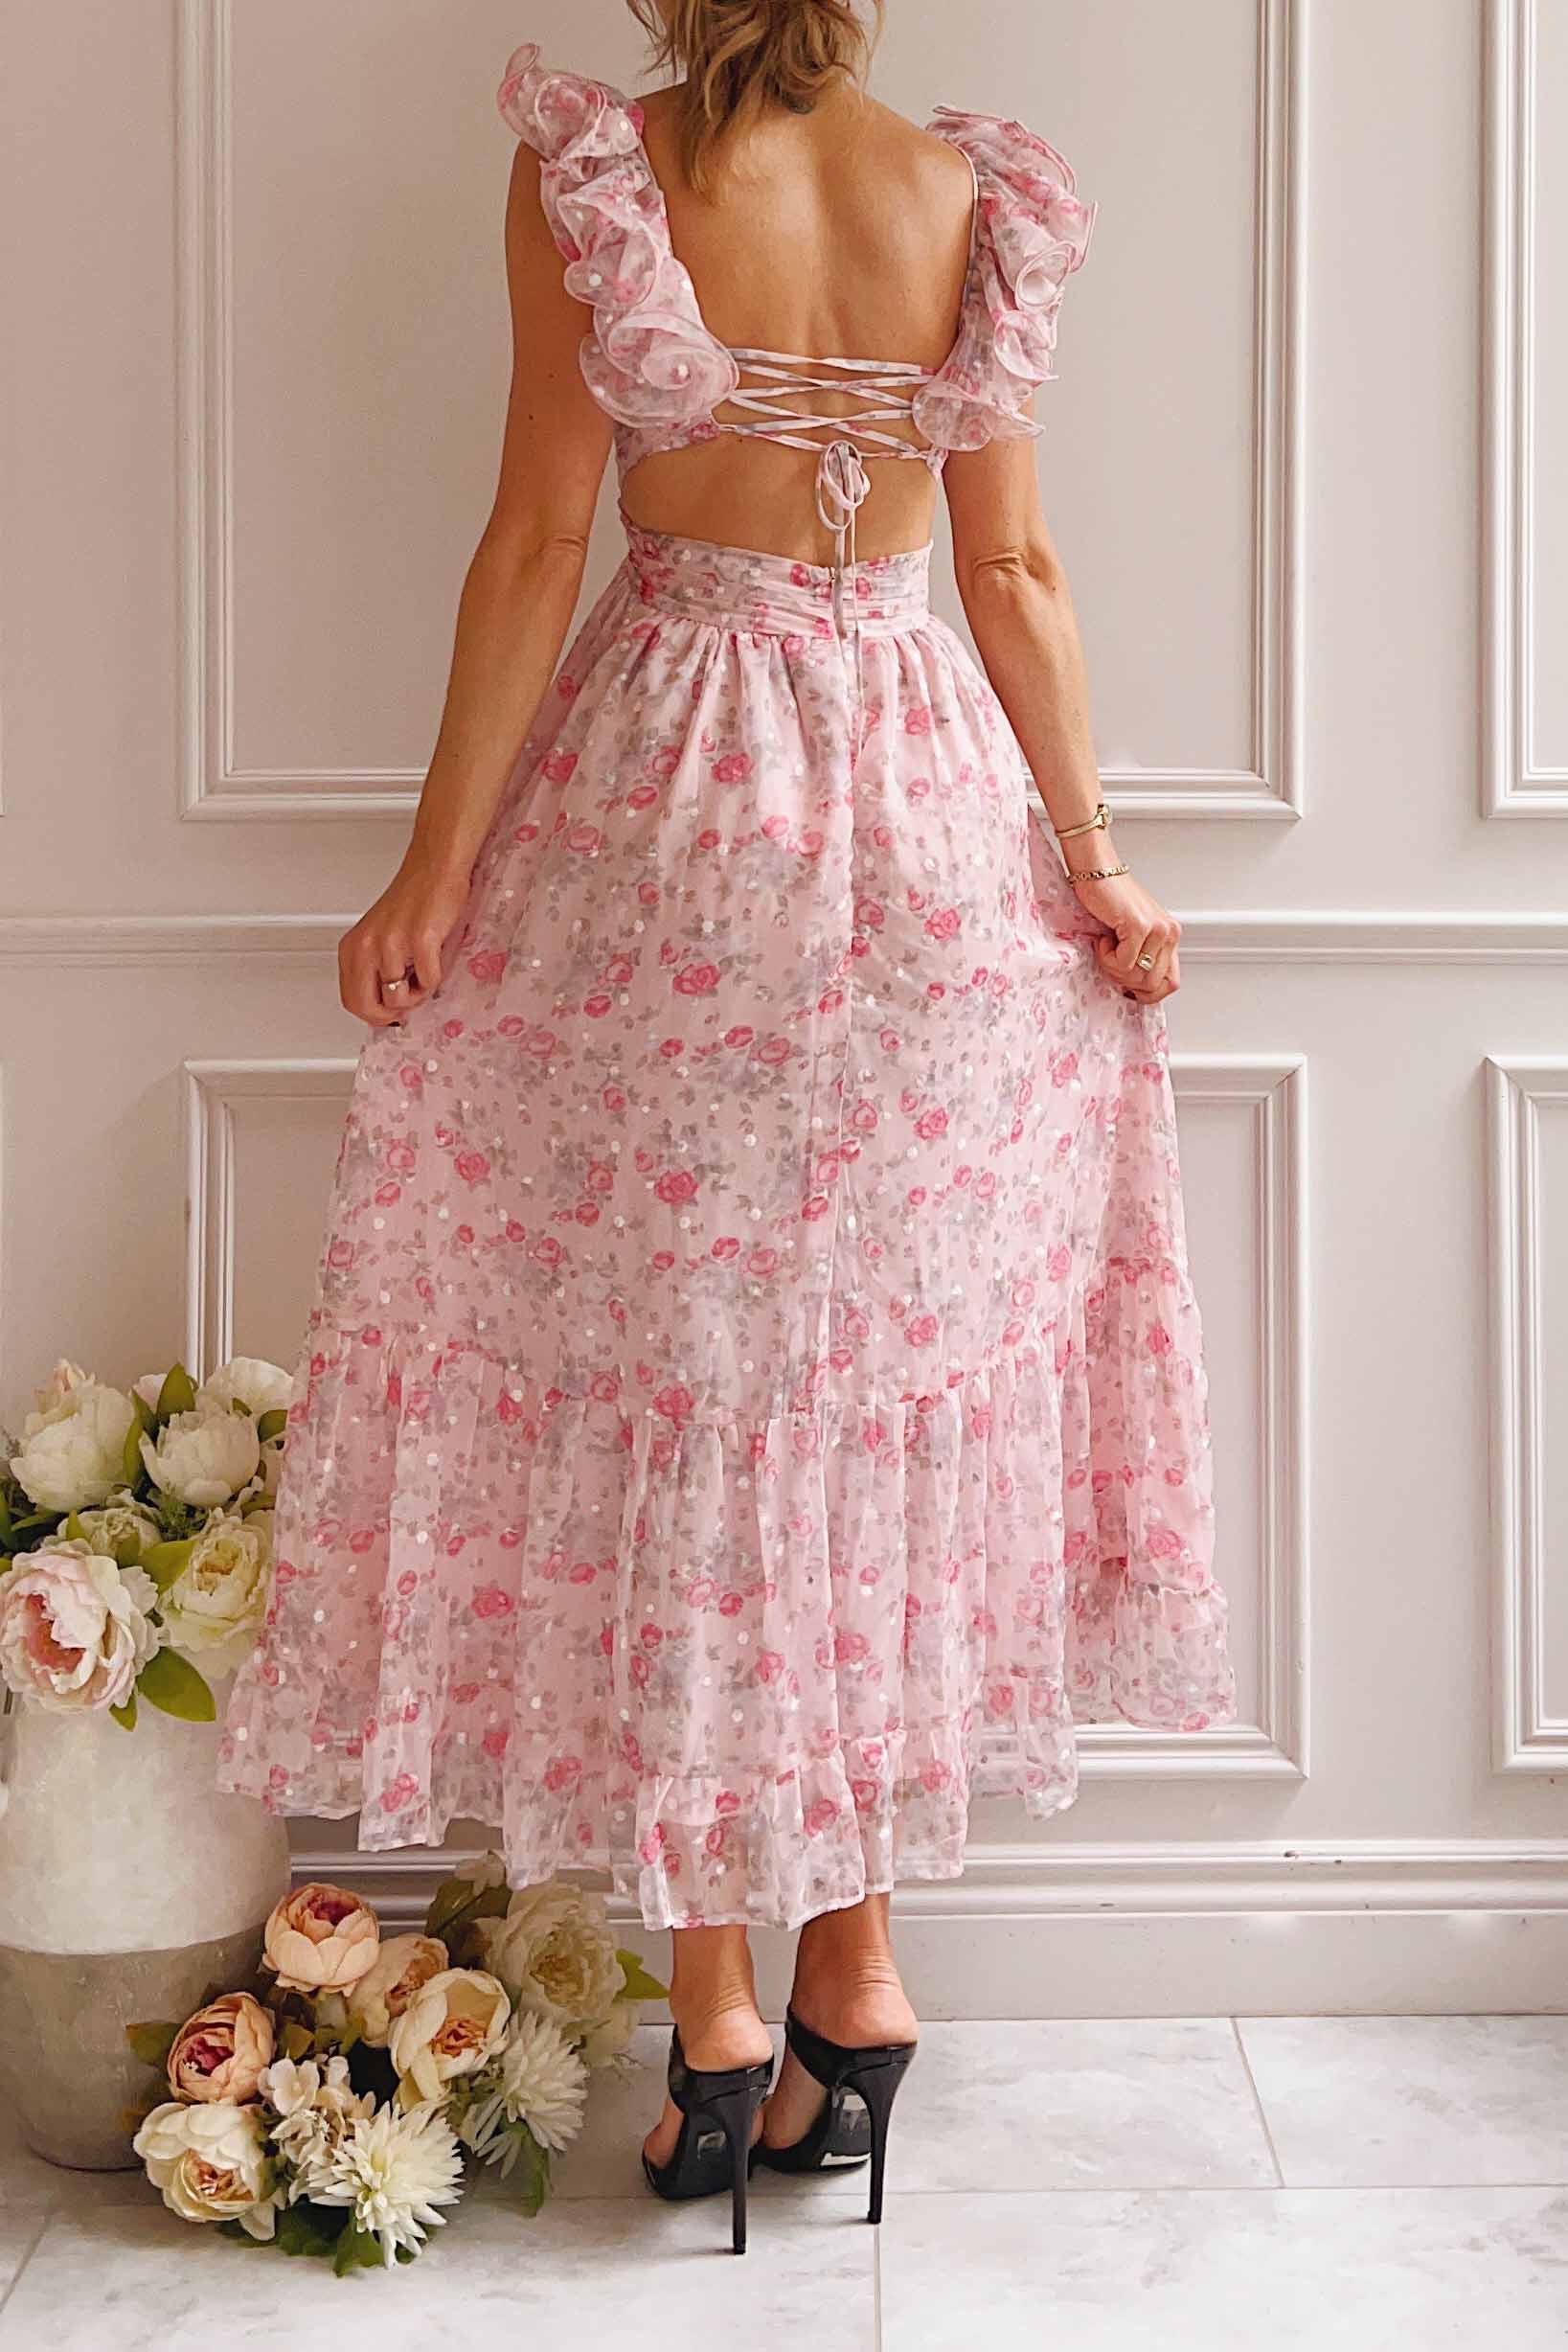 Alvaine Long Pink Floral Dress w/ Ruffled Straps